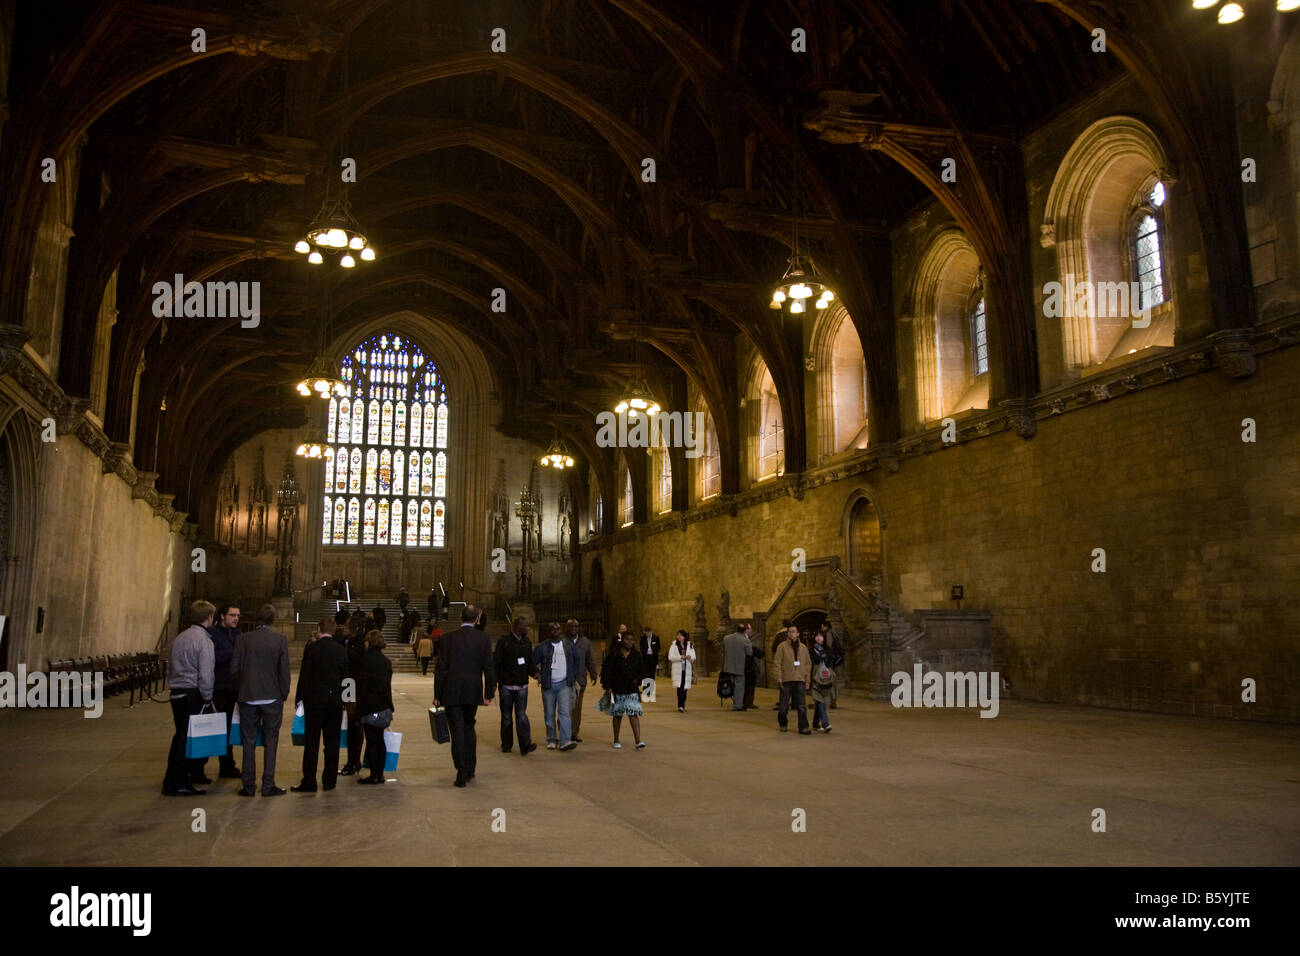 Hammer-Strahl Dach von Westminster Hall, Houses of Parliament, Westminster. London UK. (44) Stockfoto